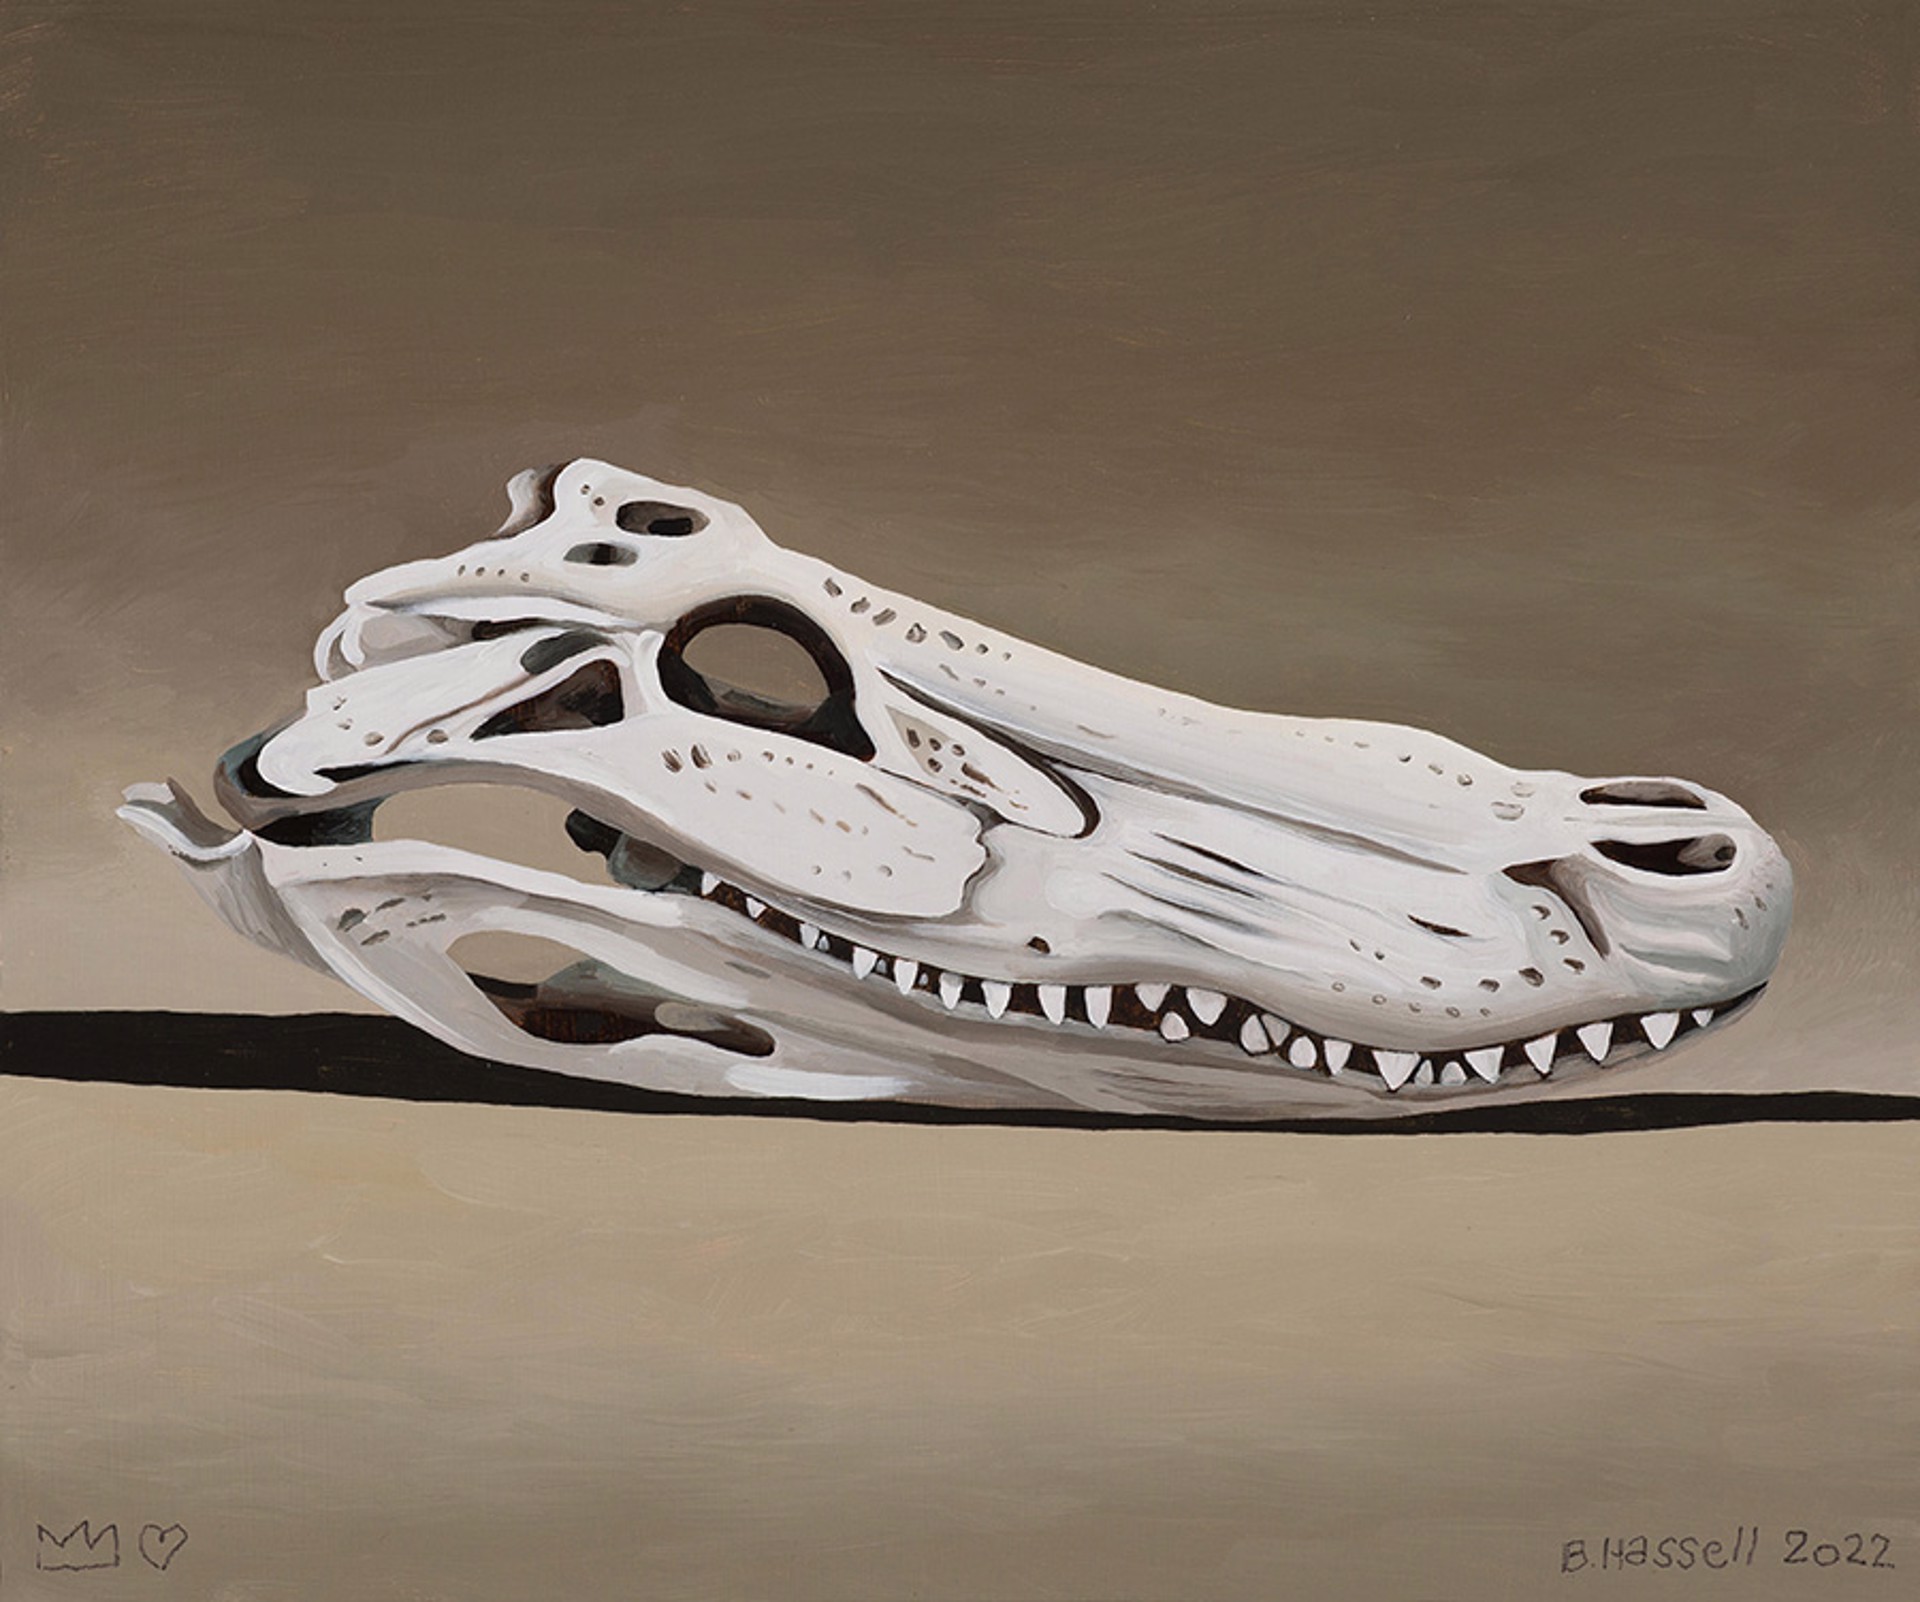 Alligator Skull by Billy Hassell